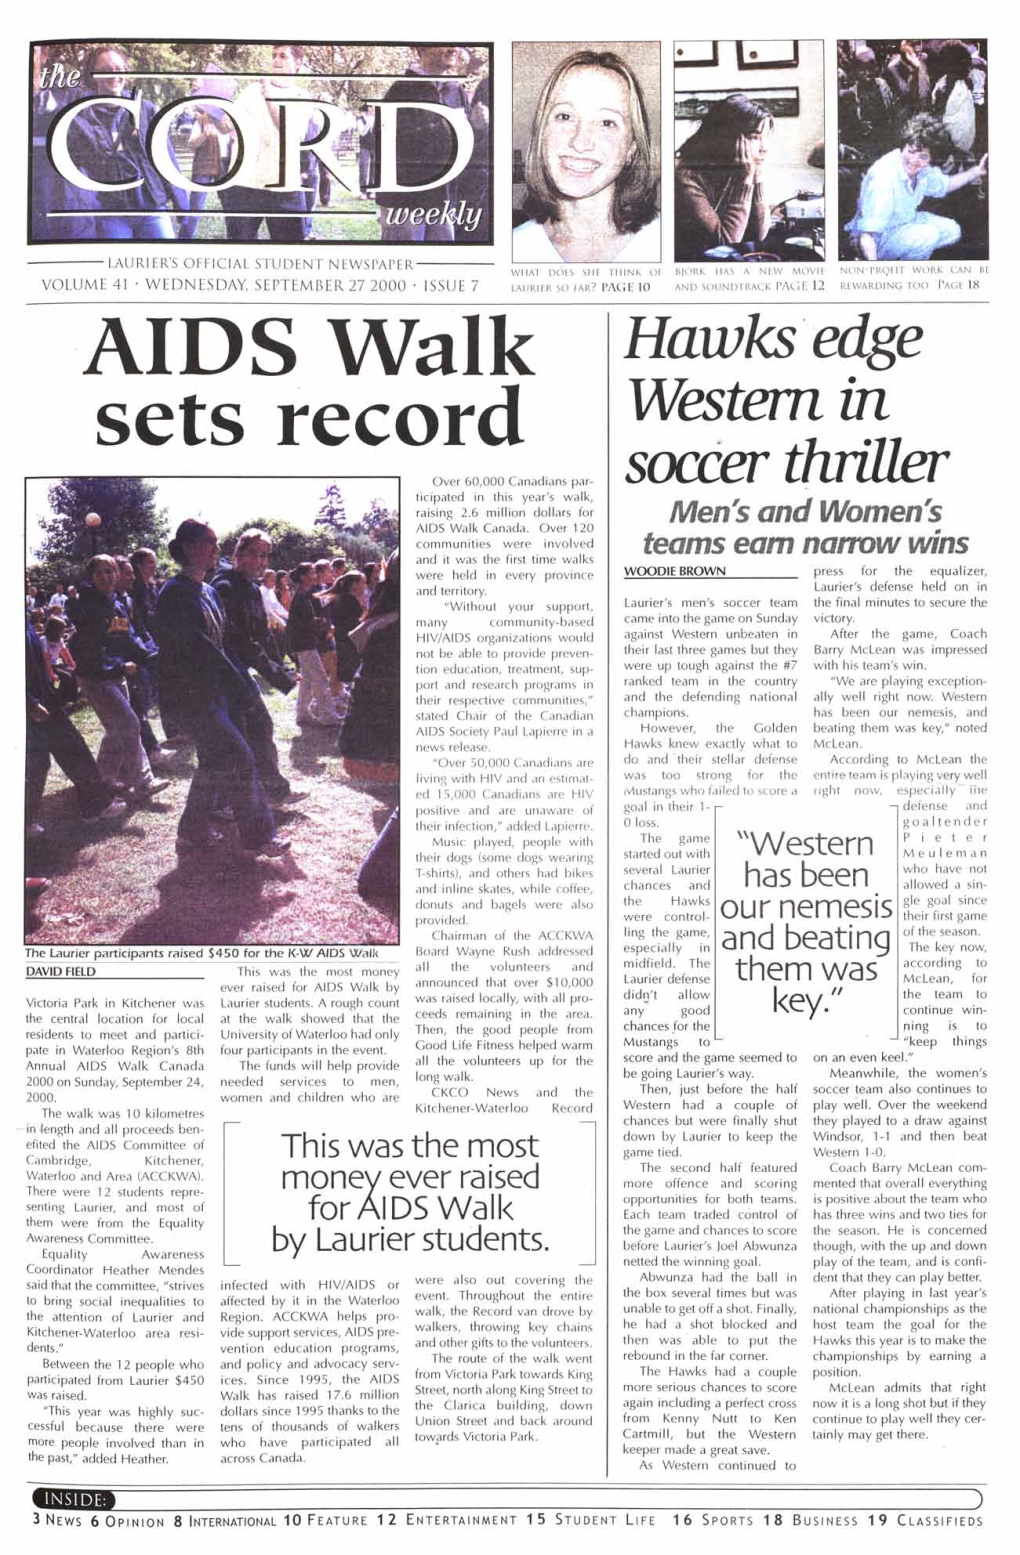 The Cord Weekly (September 27, 2000)